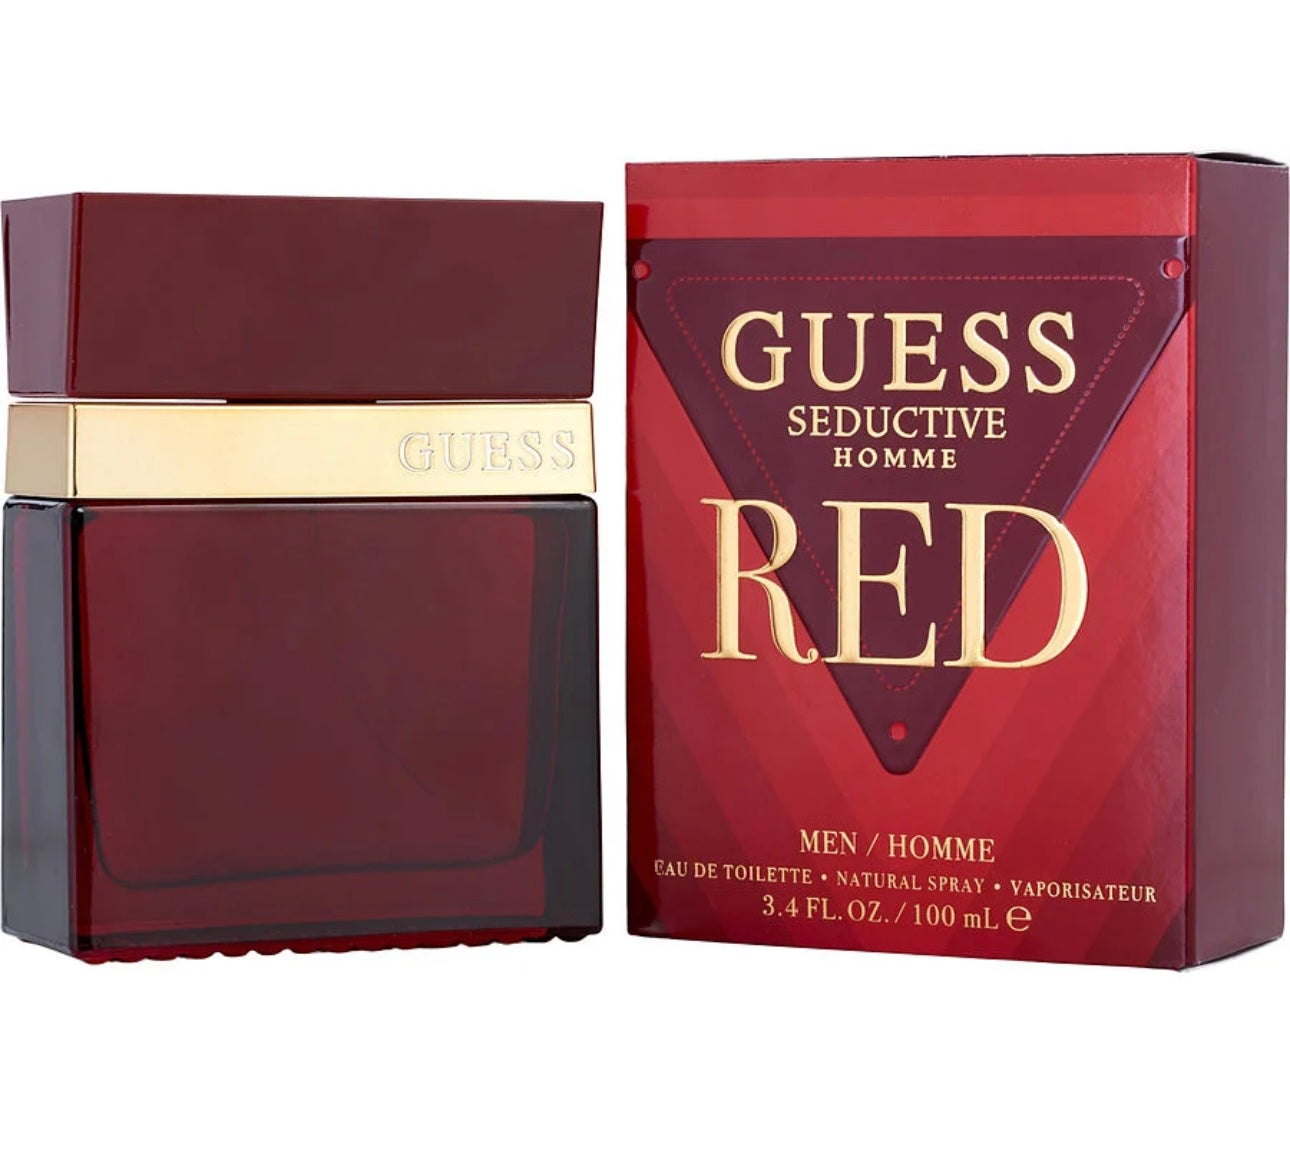 Guess-Guess Seductive Homme Red-EdT